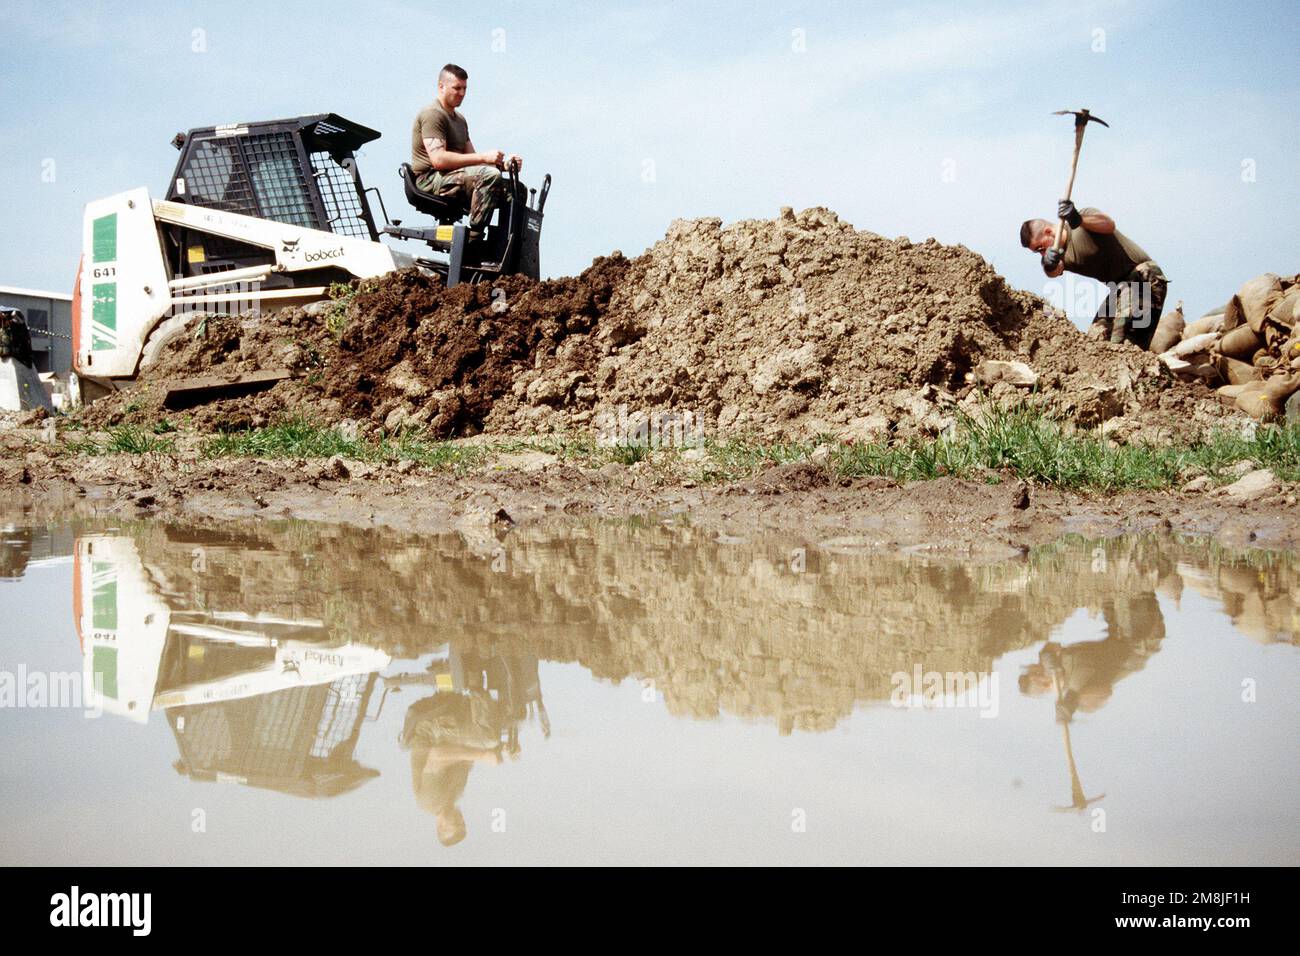 A Seabee operates an earthmover as another Seabee uses a pick axe at one of several sites being worked on at Camp Pleso.(Exact date unknown). Subject Operation/Series: PROVIDE PROMISE Base: Zagreb Country: Croatia (CRO) Stock Photo